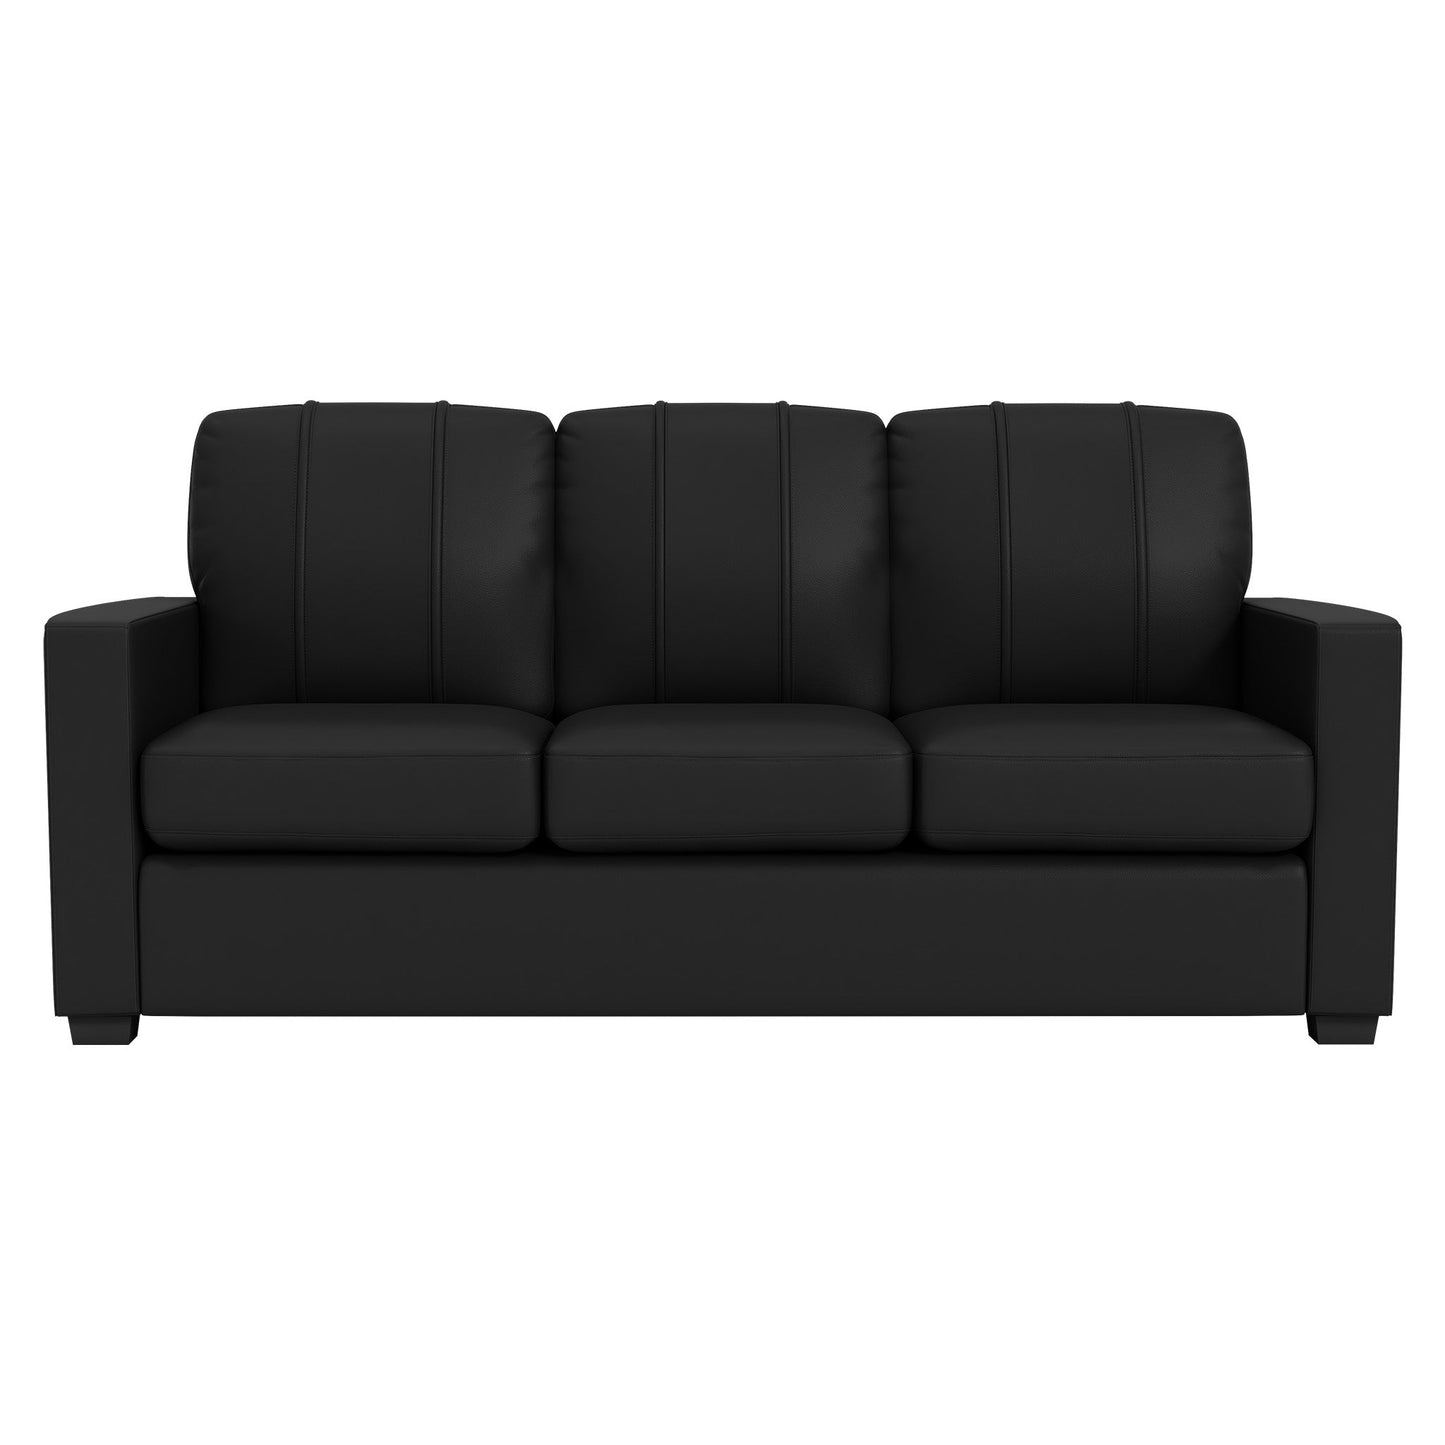 Silver Sofa with Celtics Crossover Gaming Wordmark Green [CAN ONLY BE SHIPPED TO MASSACHUSETTS]